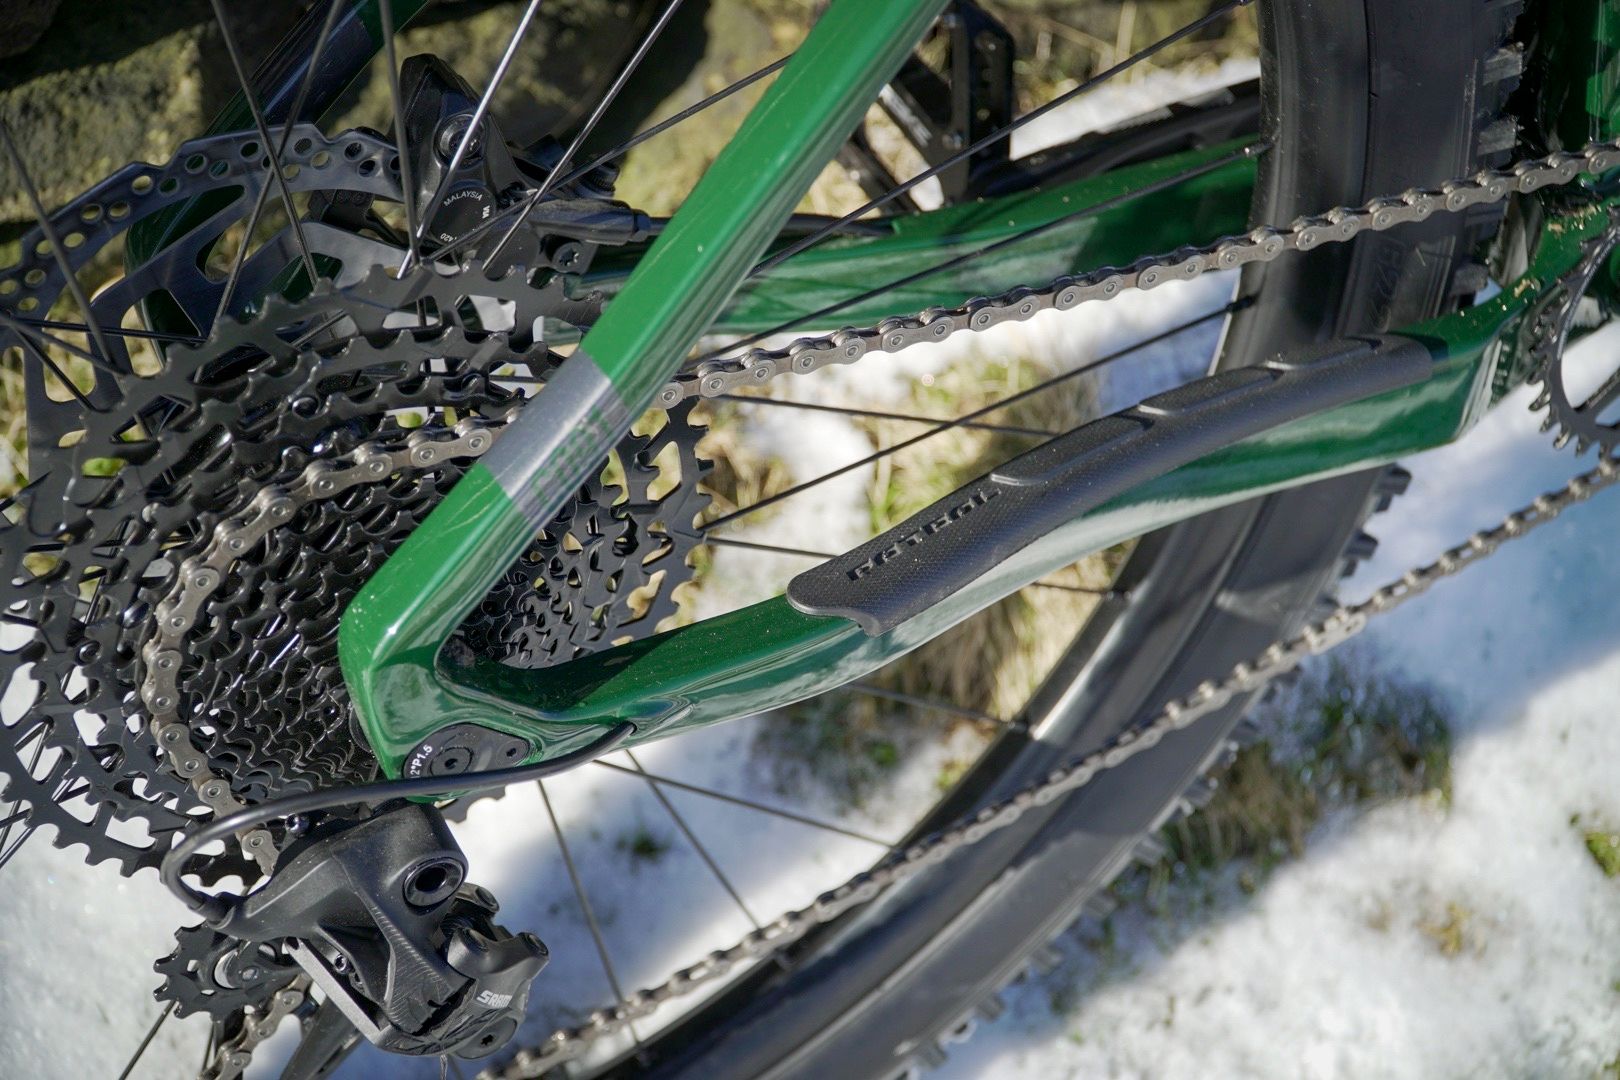 First Look: Patrol C091 Carbon Hardtail